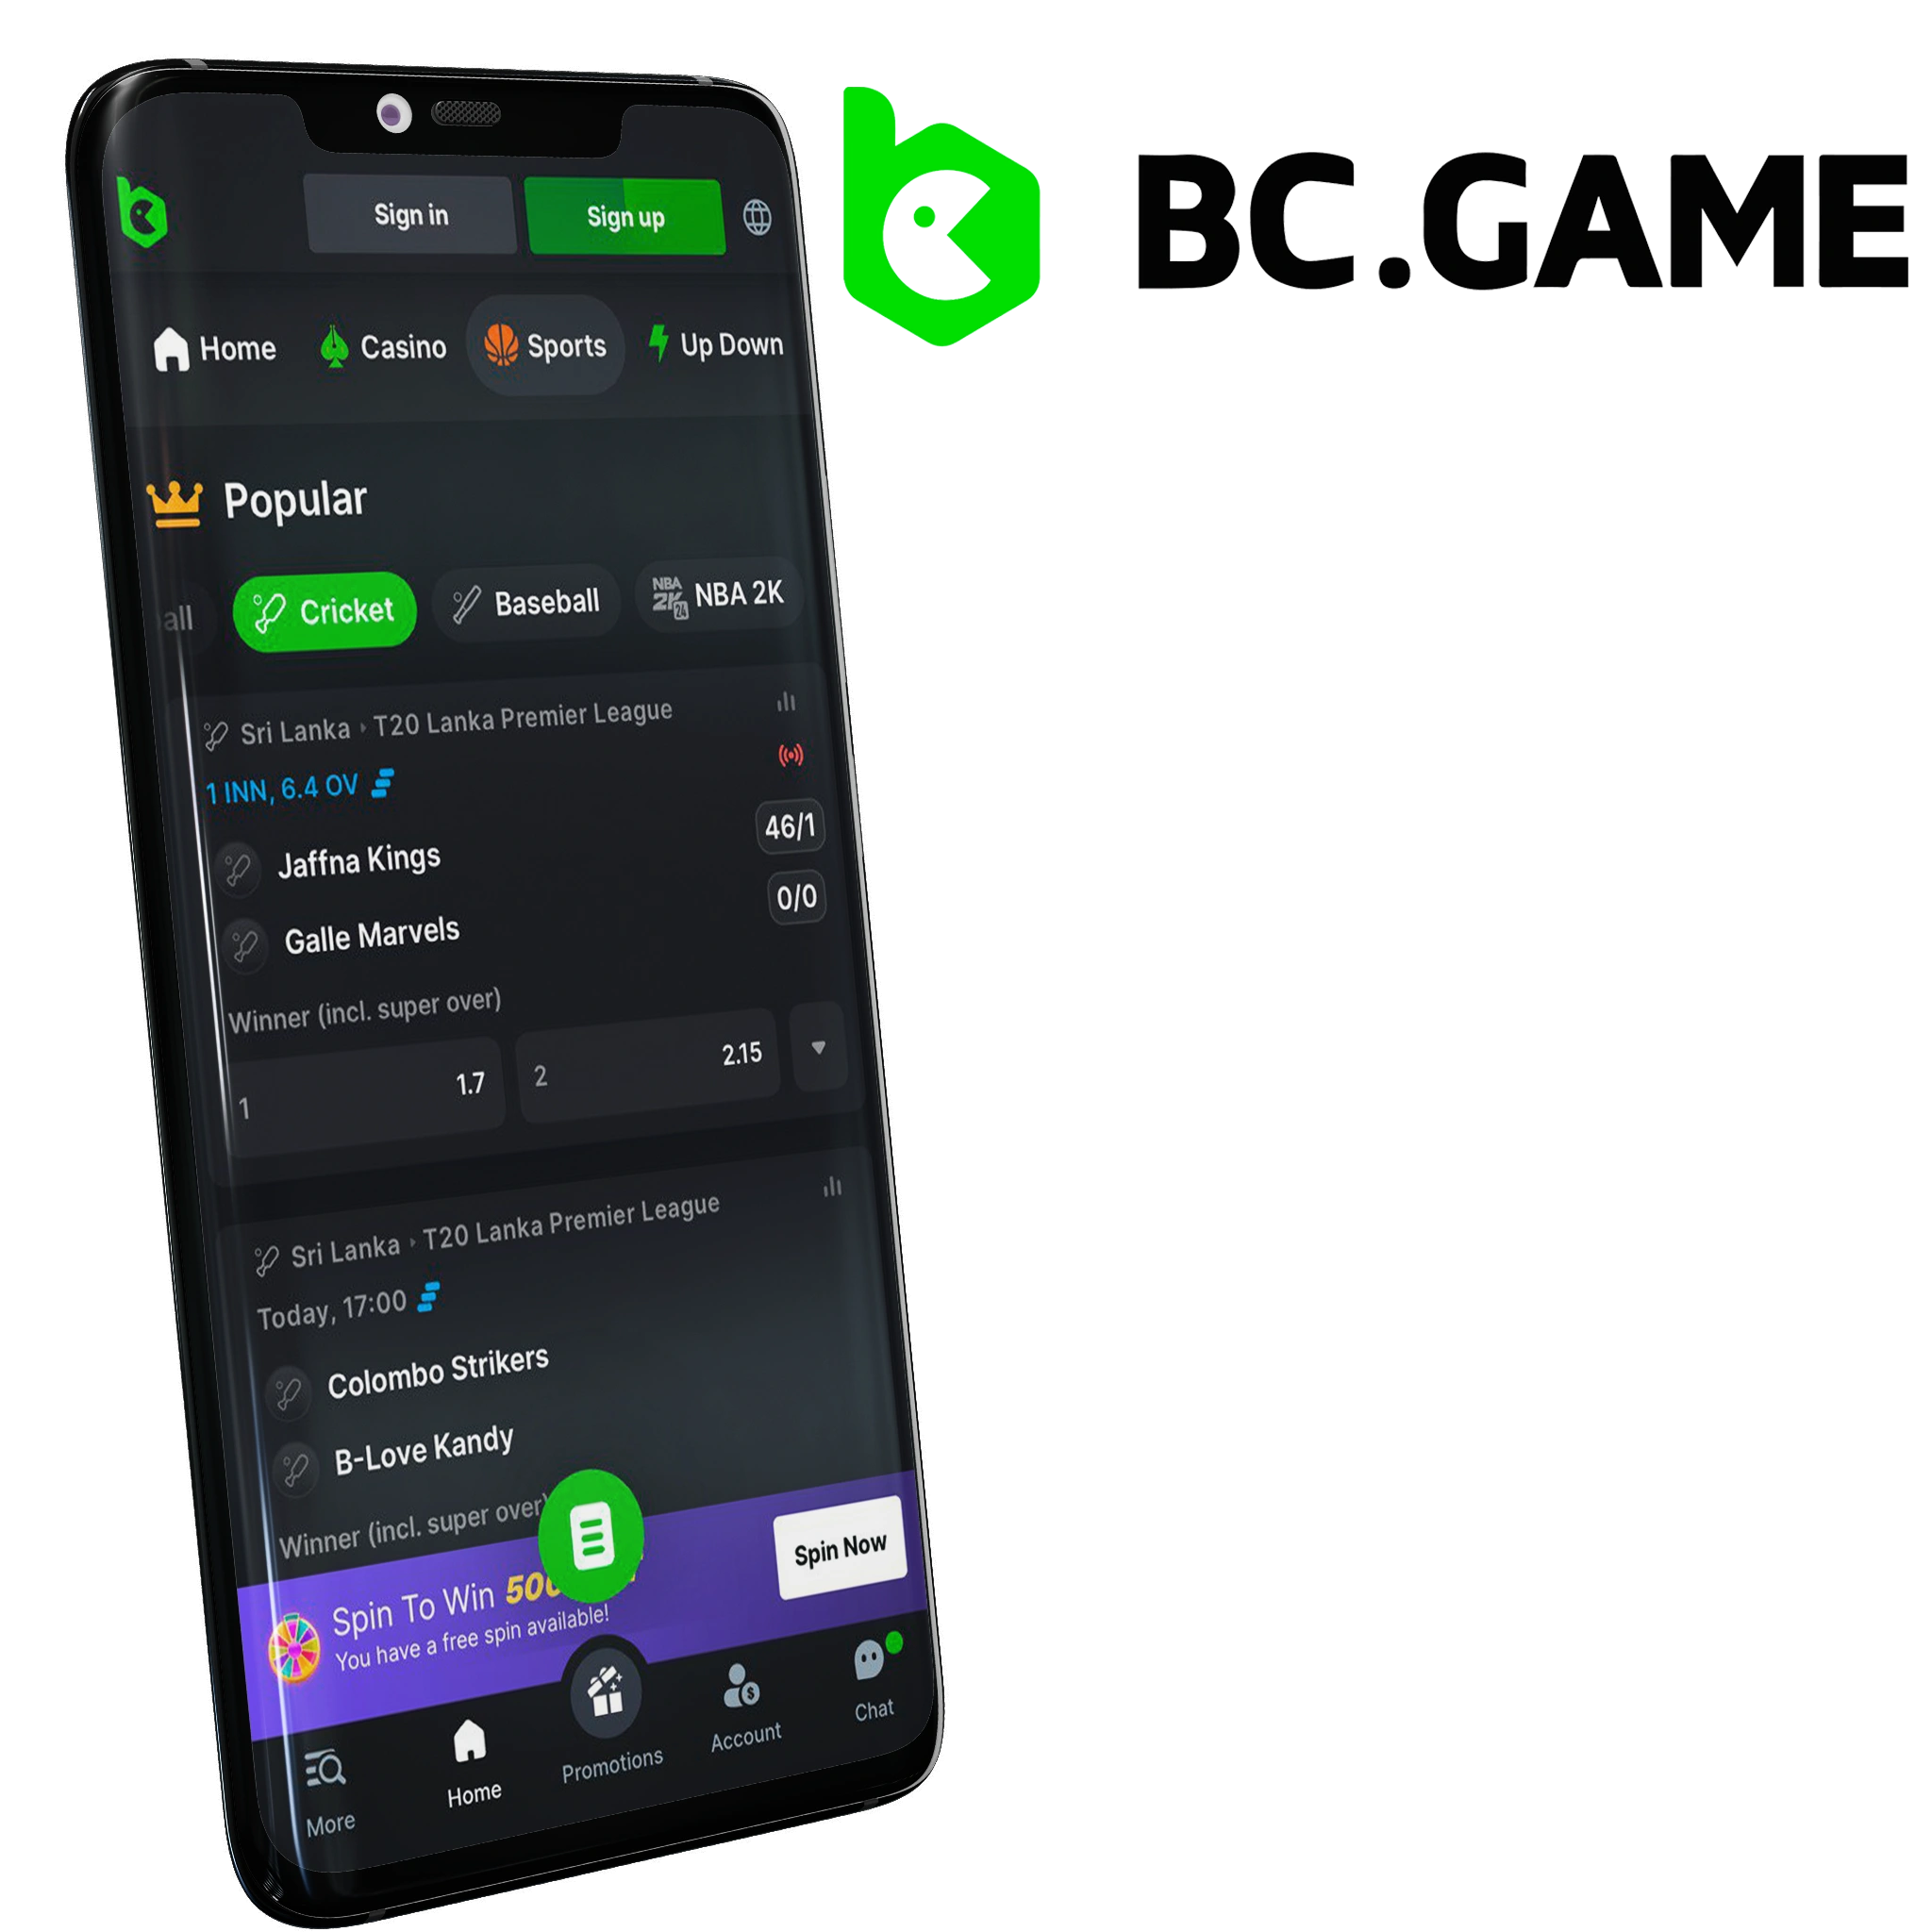 BC.Game App provides one-click access to all live cricket matches.